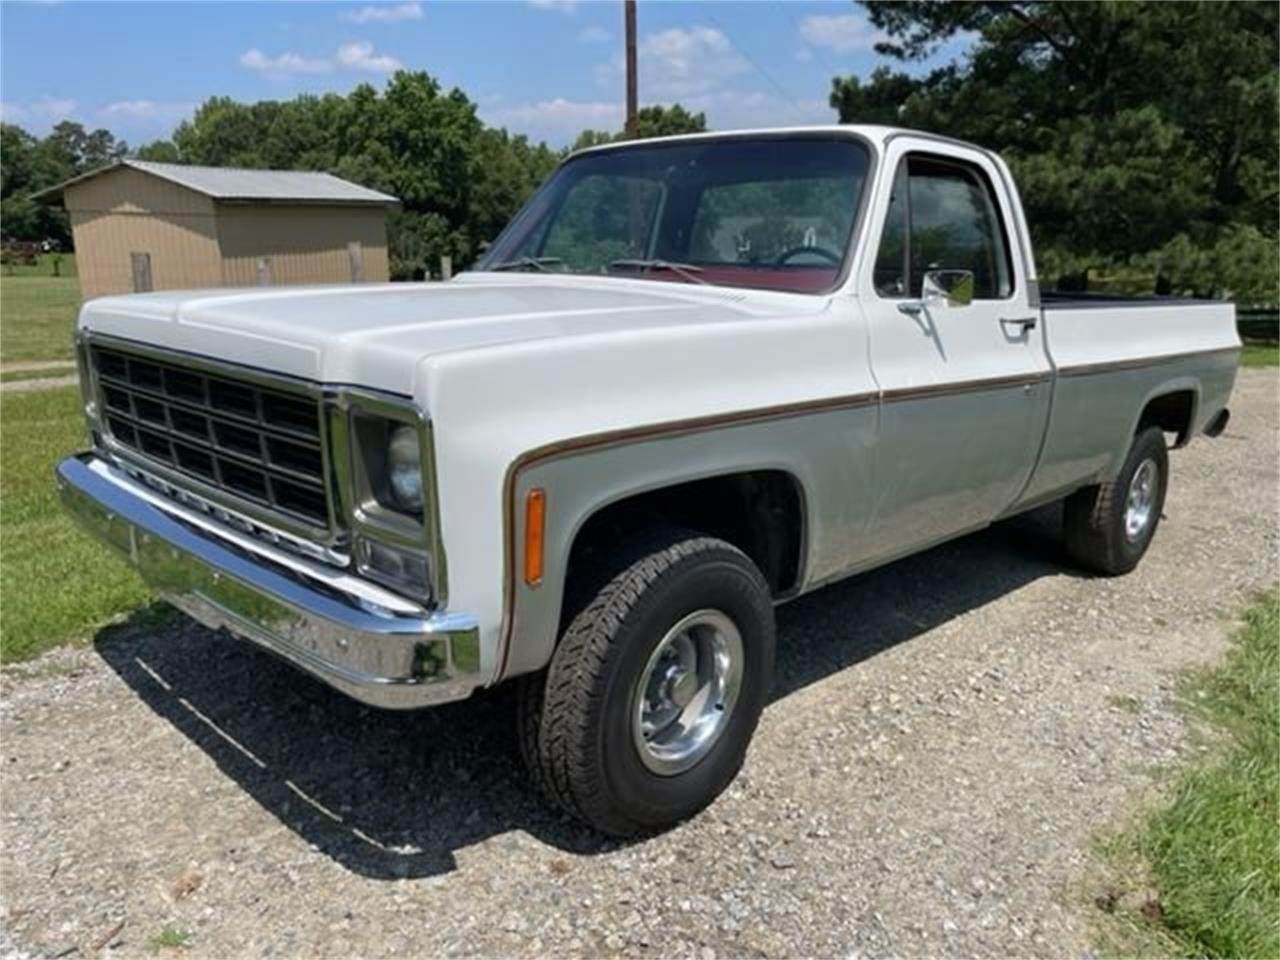 For Sale at Auction: 1979 Chevrolet C10 in Greensboro, North Carolina for sale in Greensboro, NC